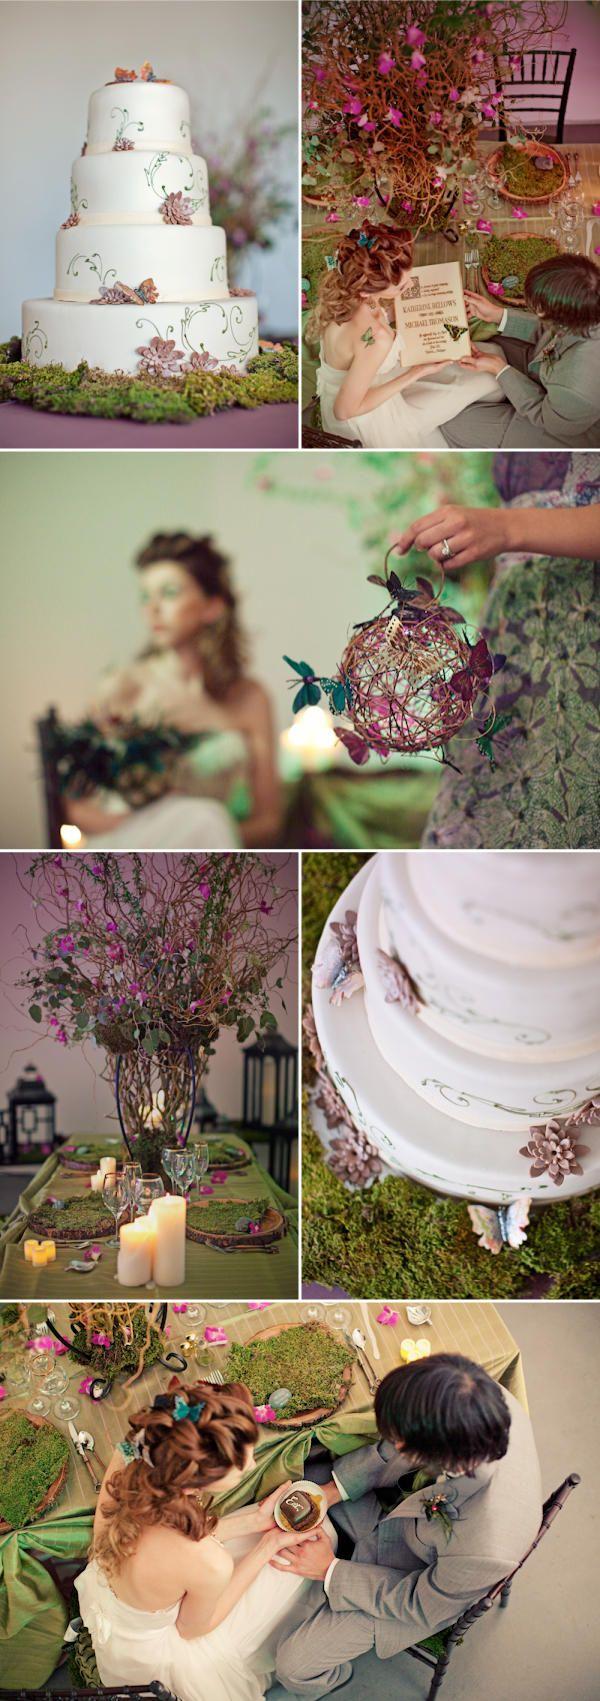 Wedding - From Inspiration To Reality: The Design